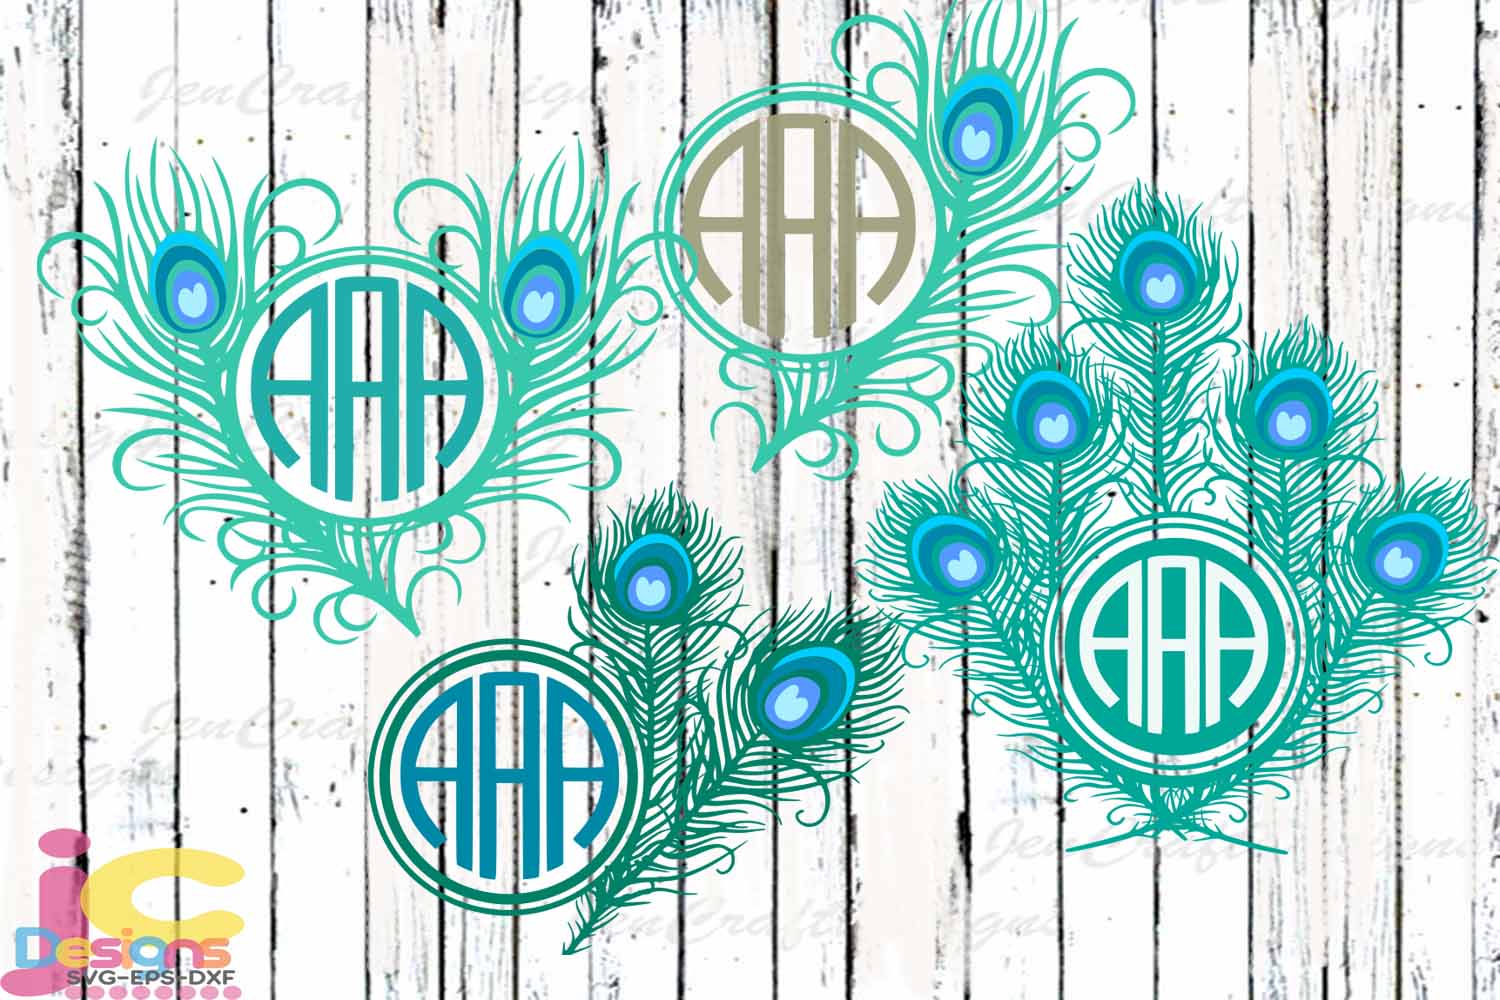 Peacock Feathers Monogram Frame SVG, Eps, Dxf